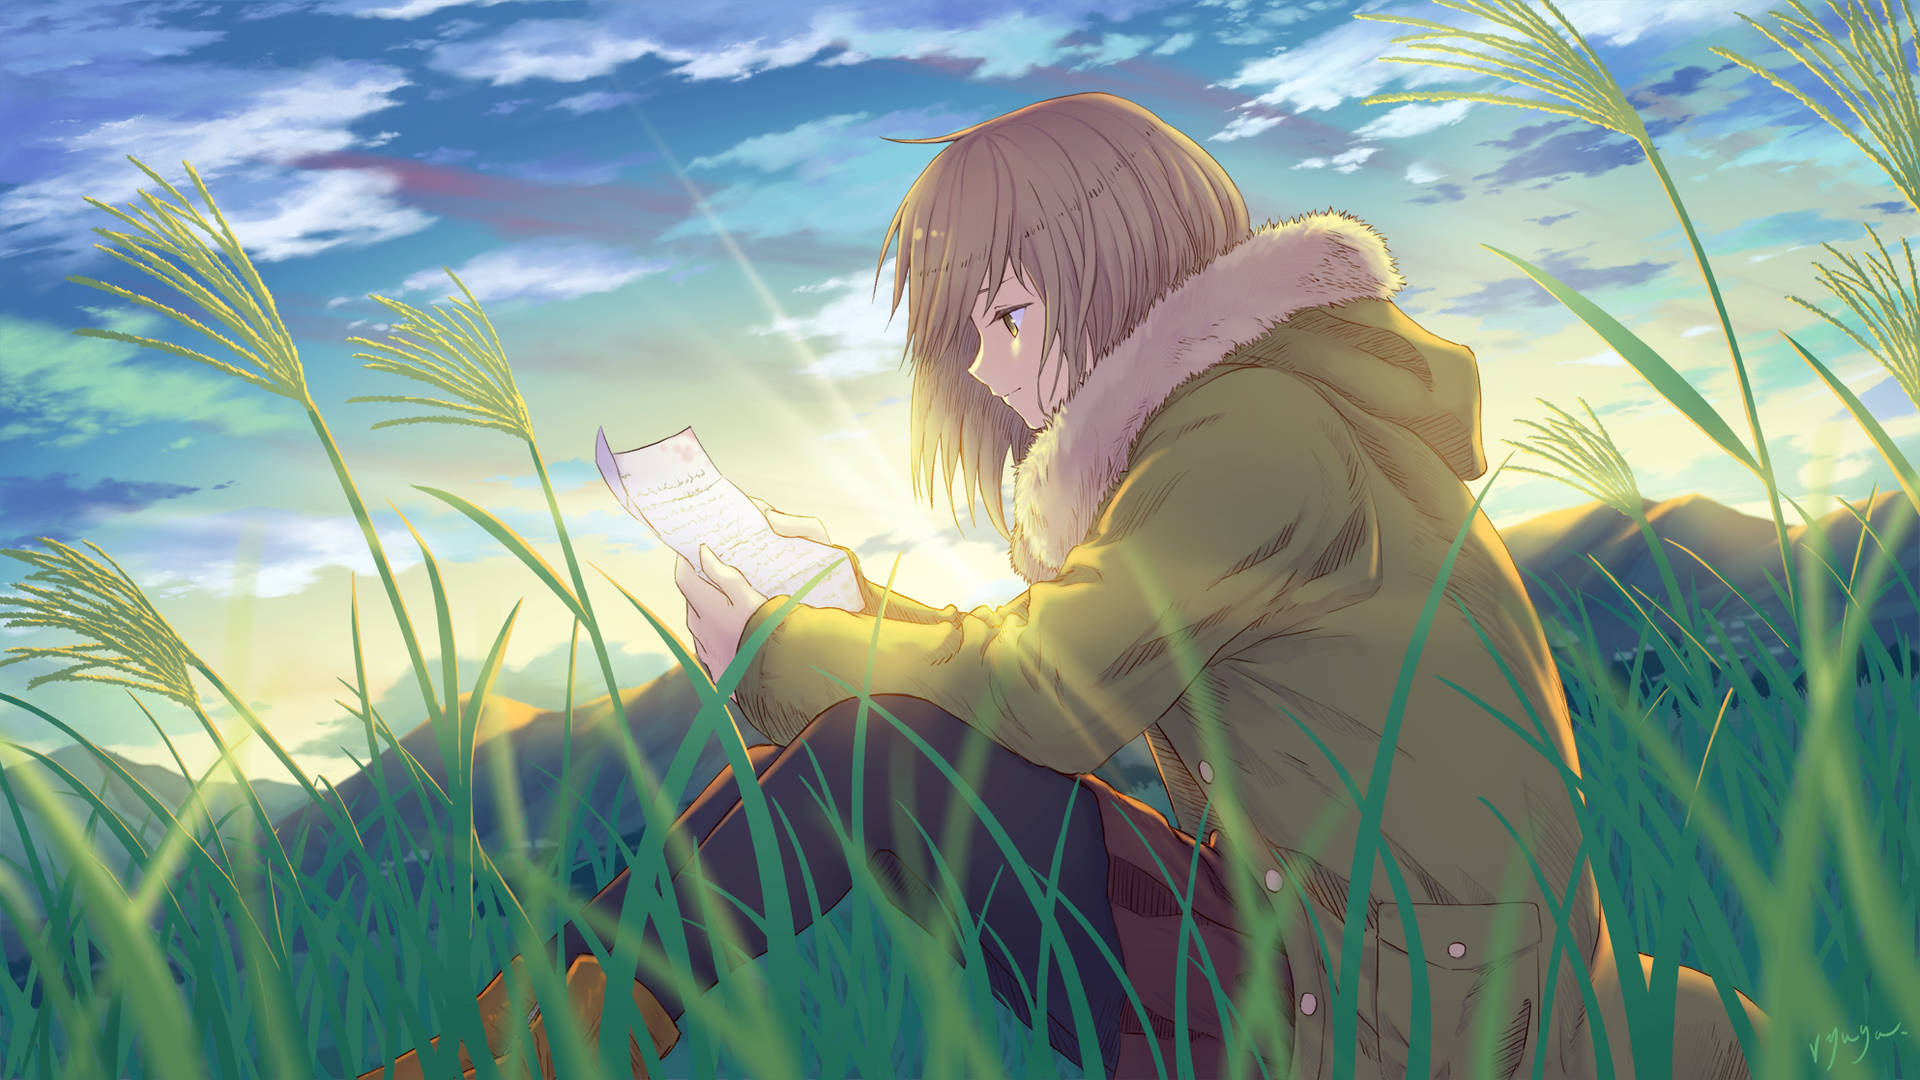 Anime Girl Reading Book In Grass Background